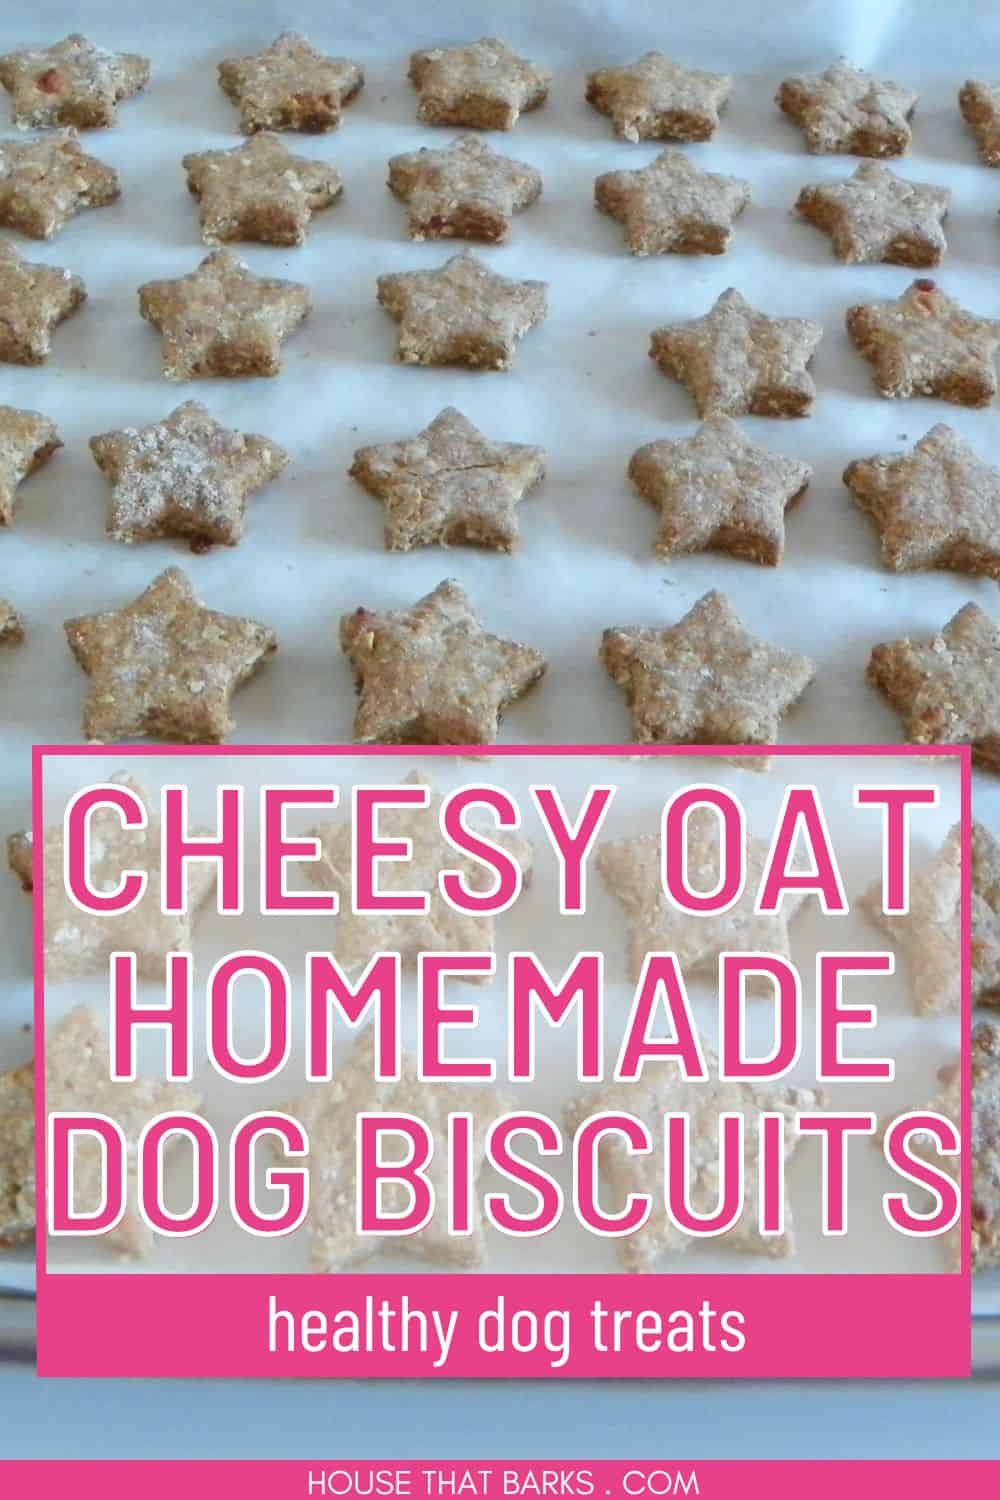 Cheesy Oat Homemade Dog Biscuits